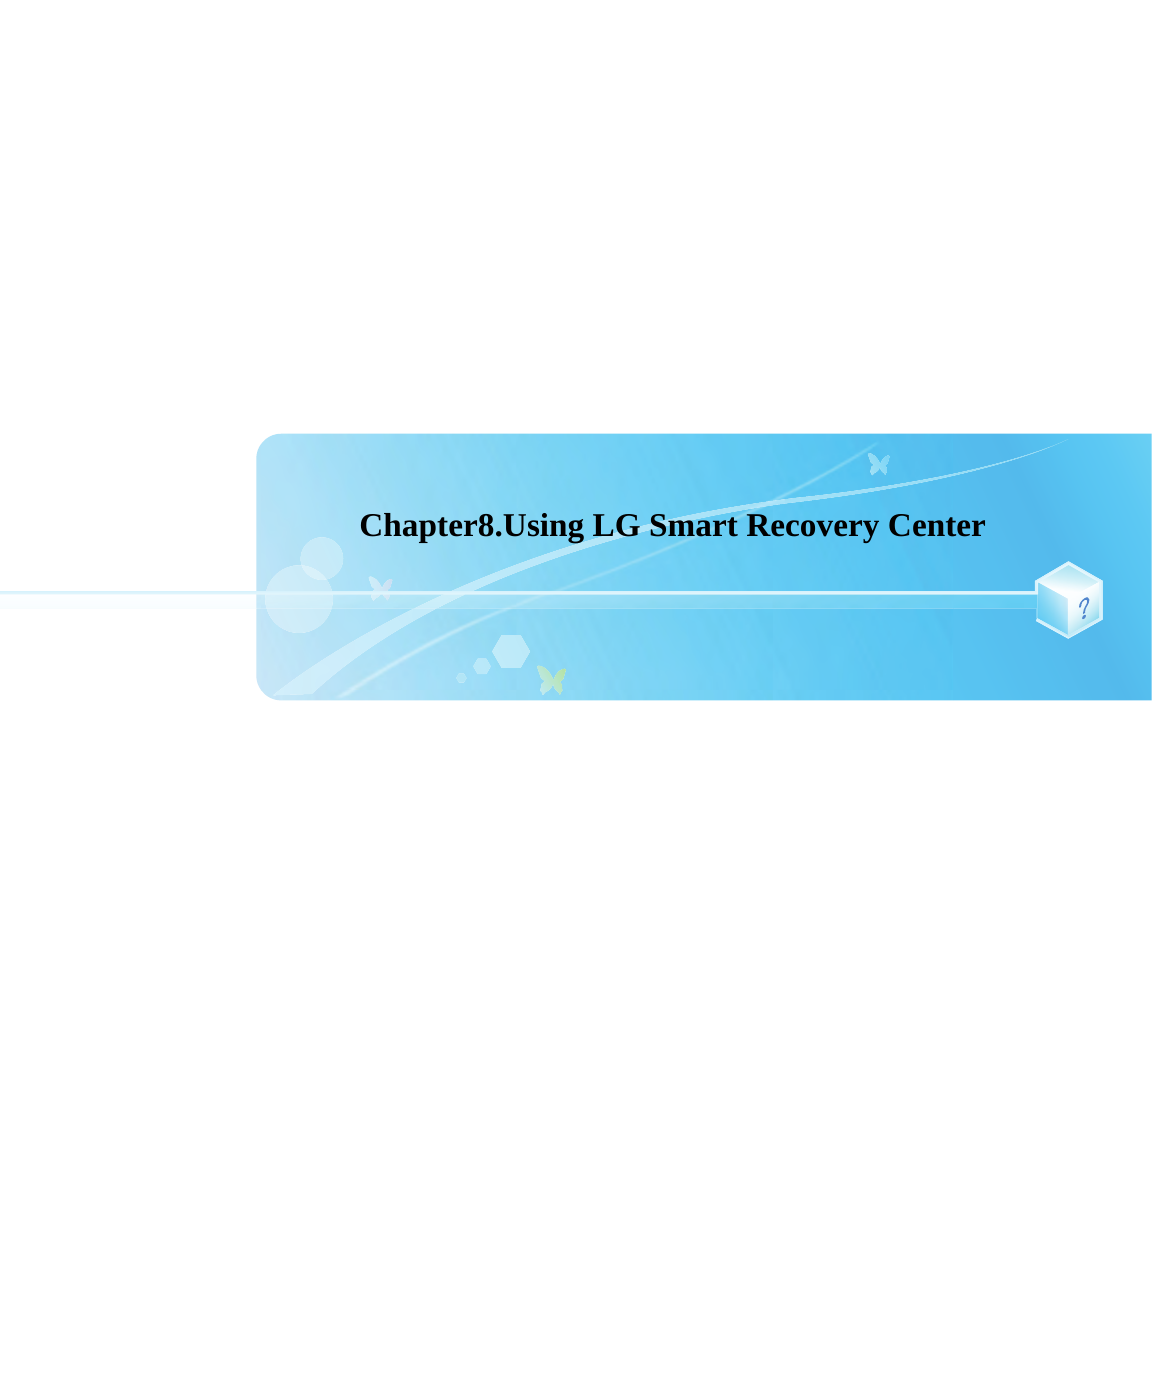 Chapter8.Using LG Smart Recovery Center